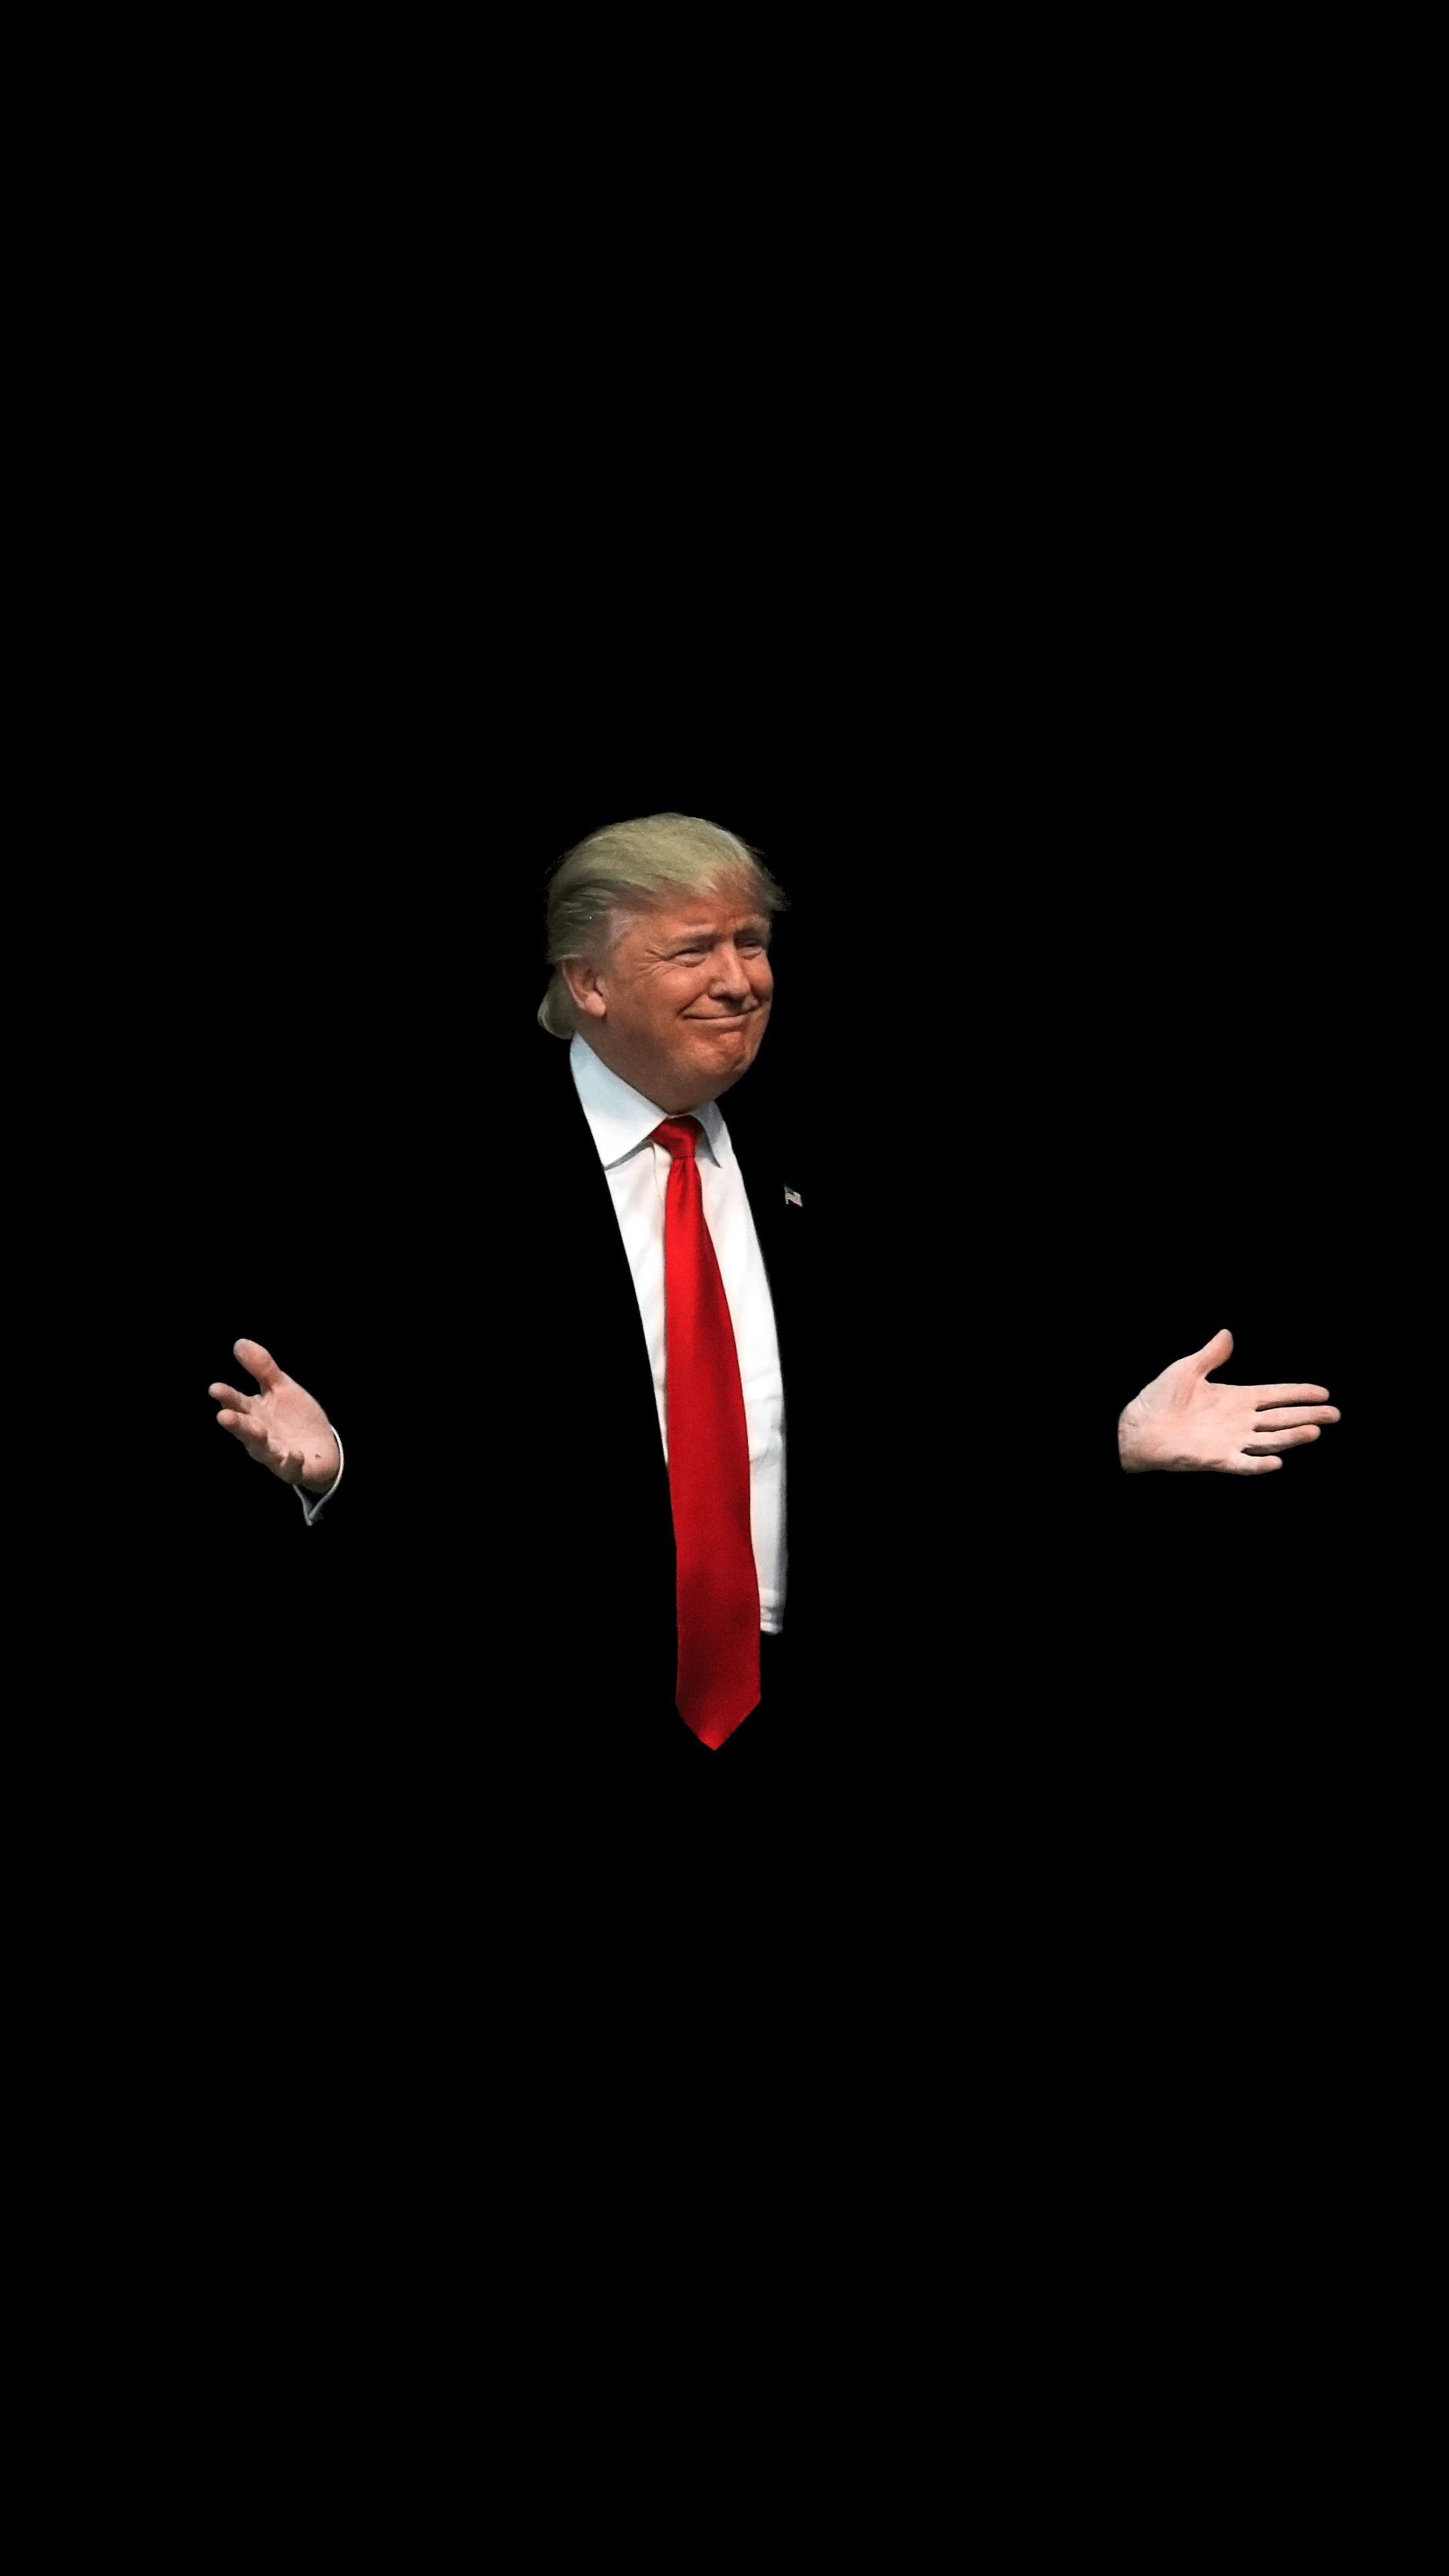 Trump Wallpaper Pictures On Greepx